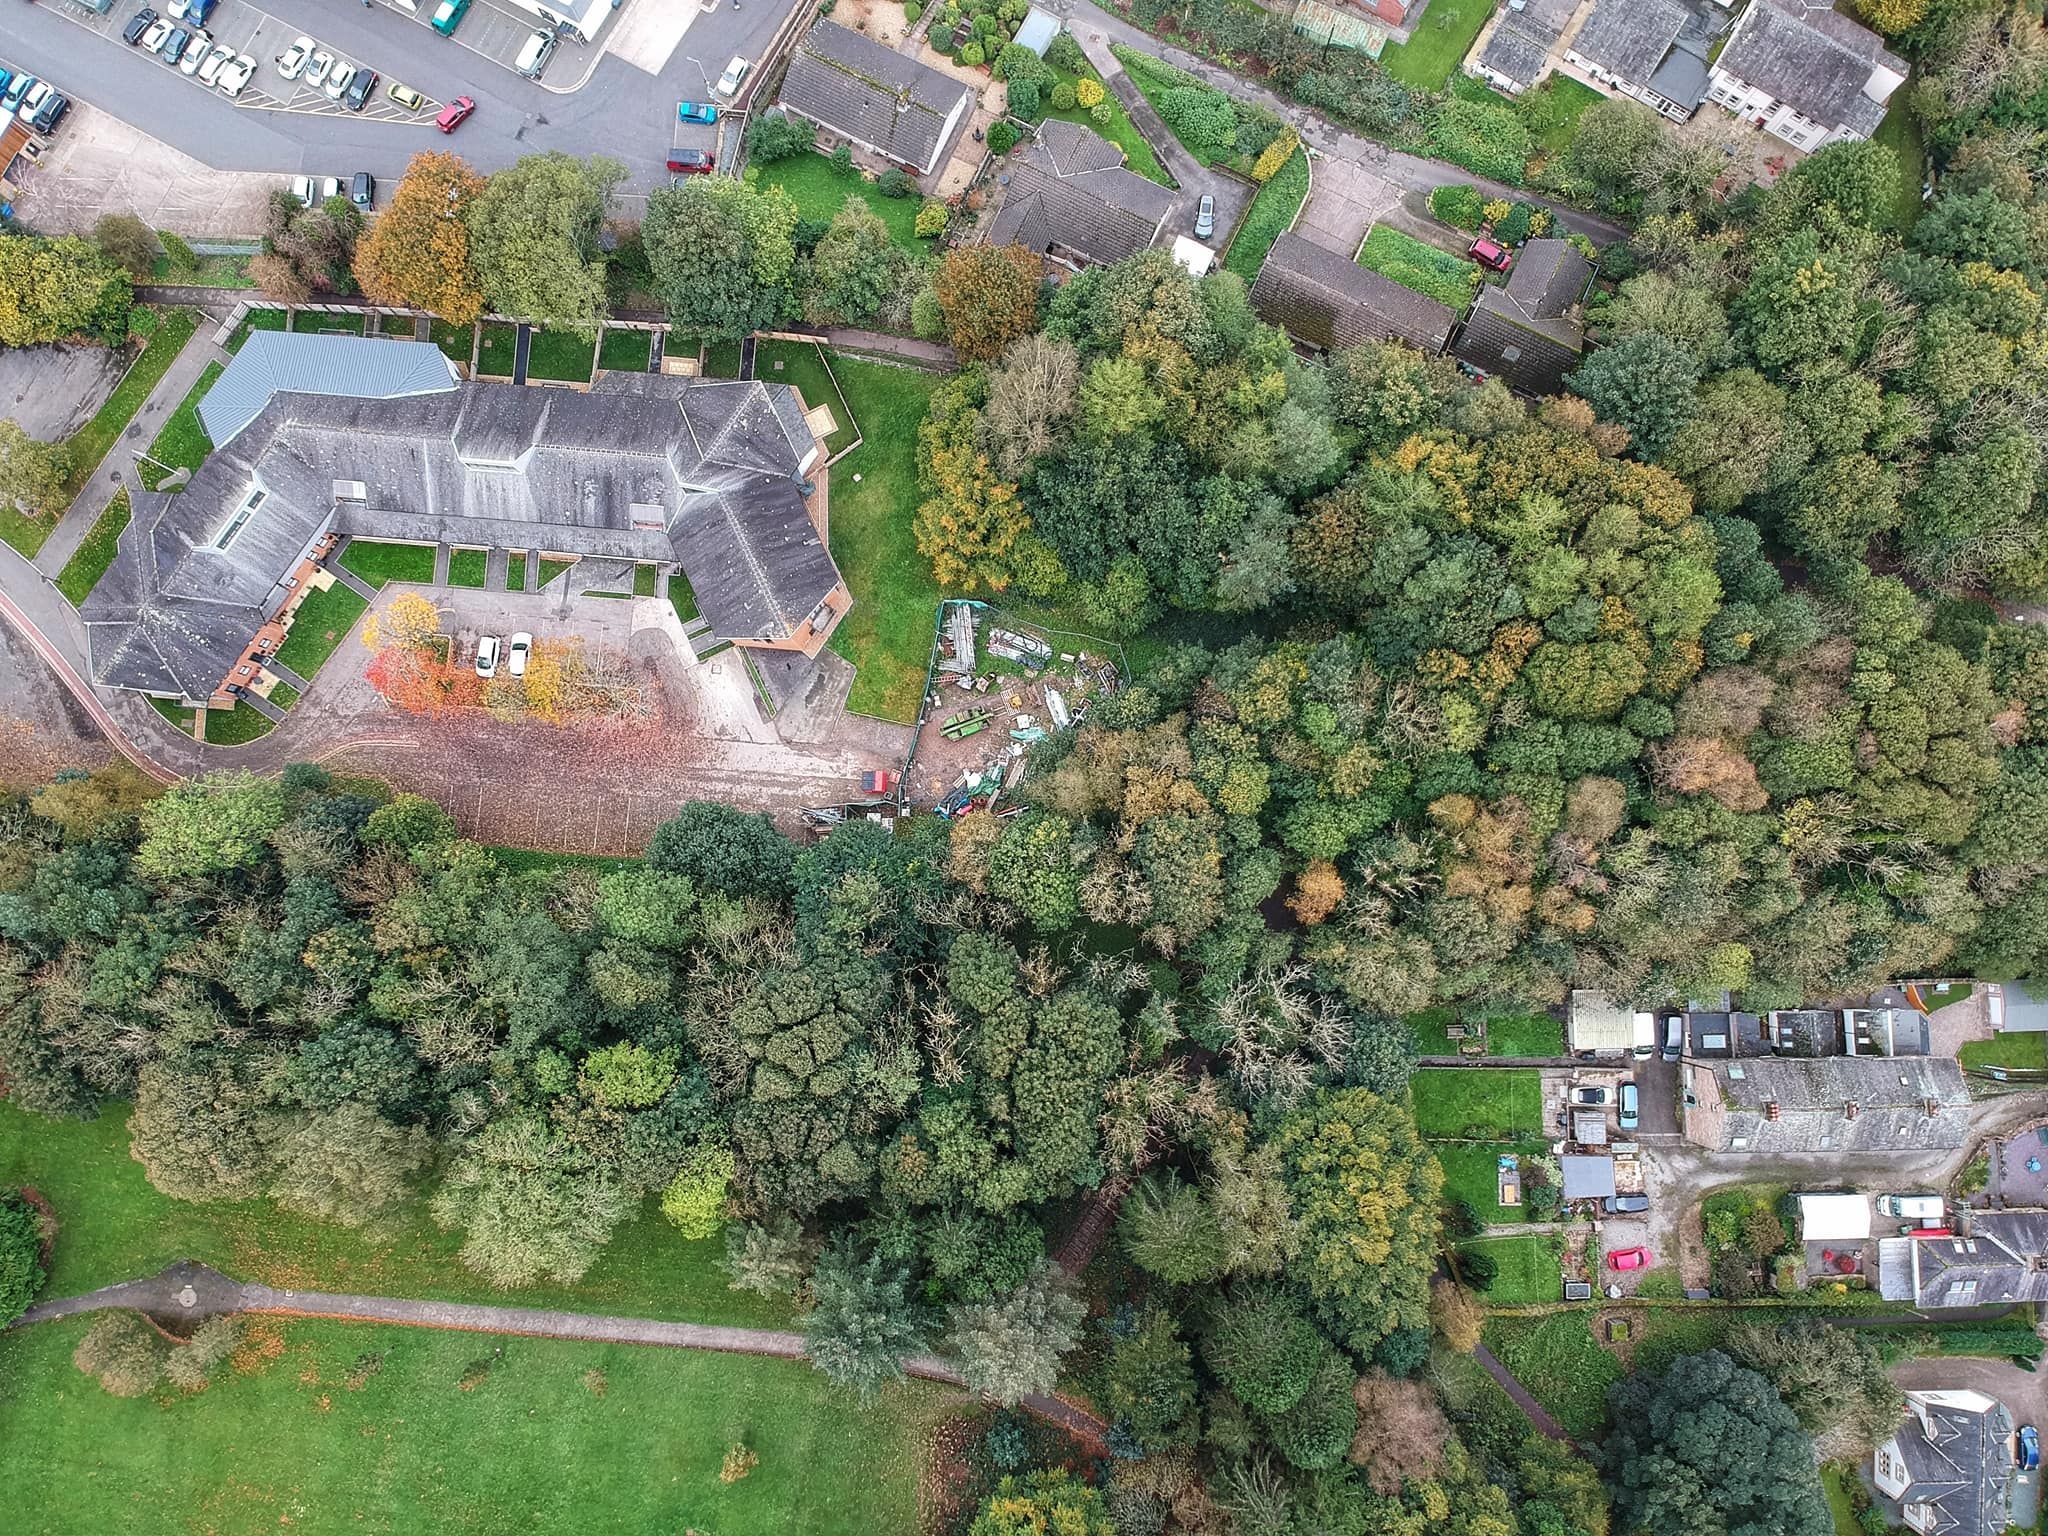 An aerial shot of the site